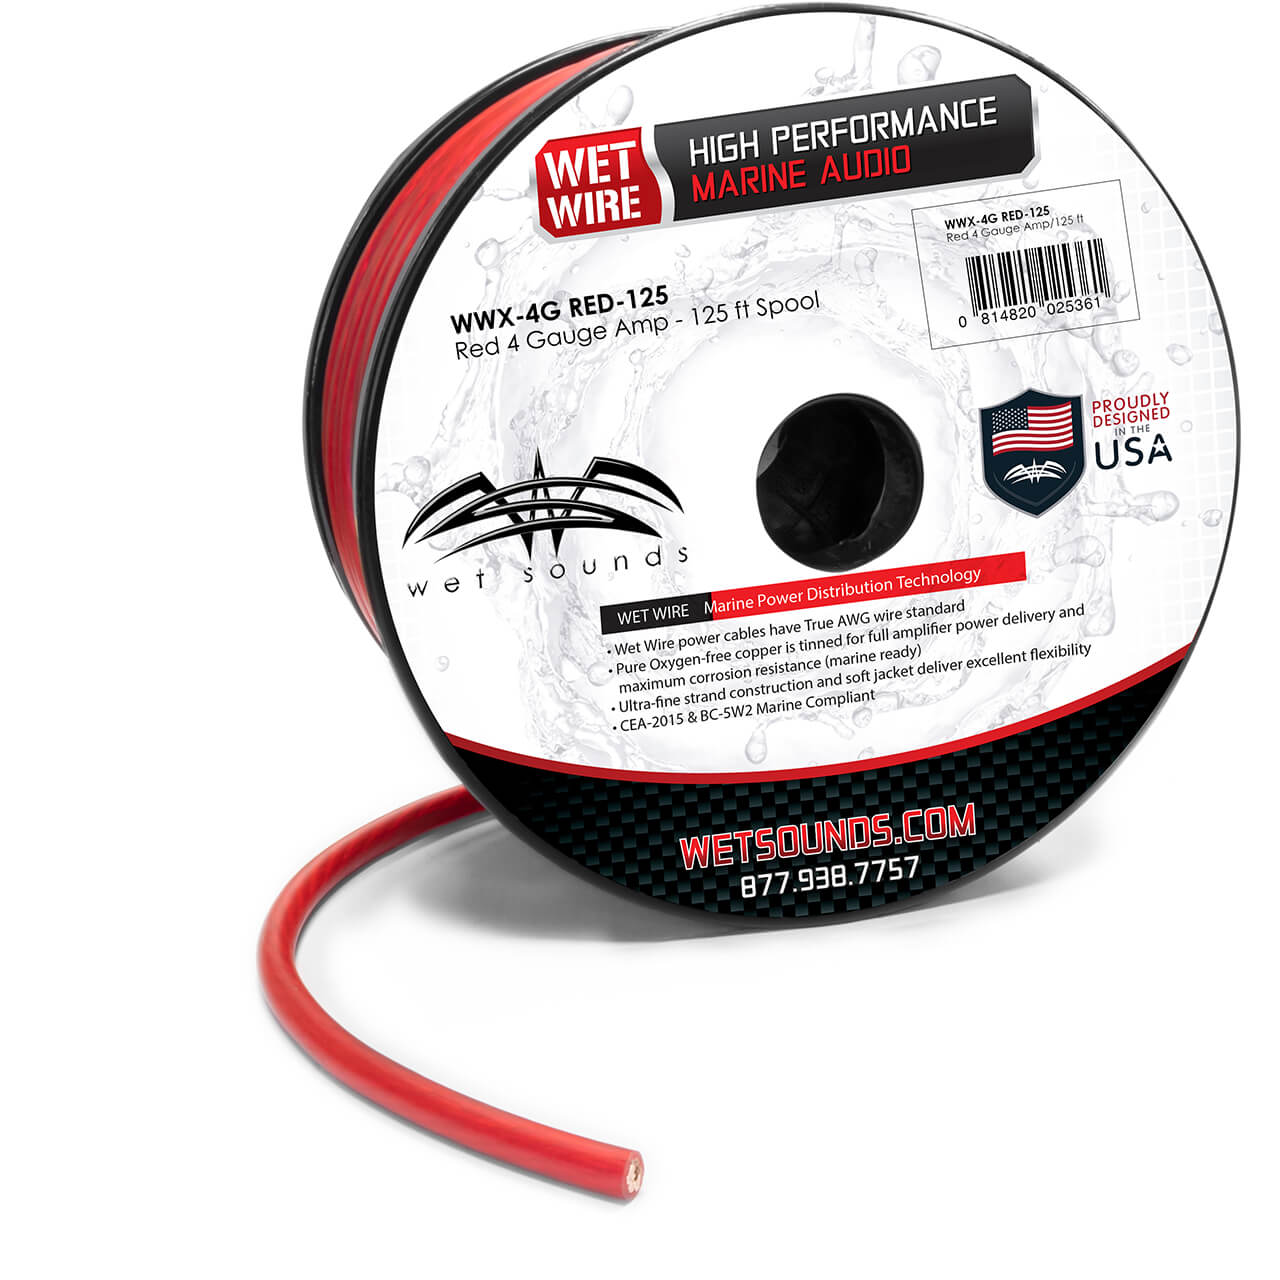 WET SOUNDS- Red Frosted 4GA Wet Wire | Red Frost 4 Gauge Amp Wire - 125 Ft Spool